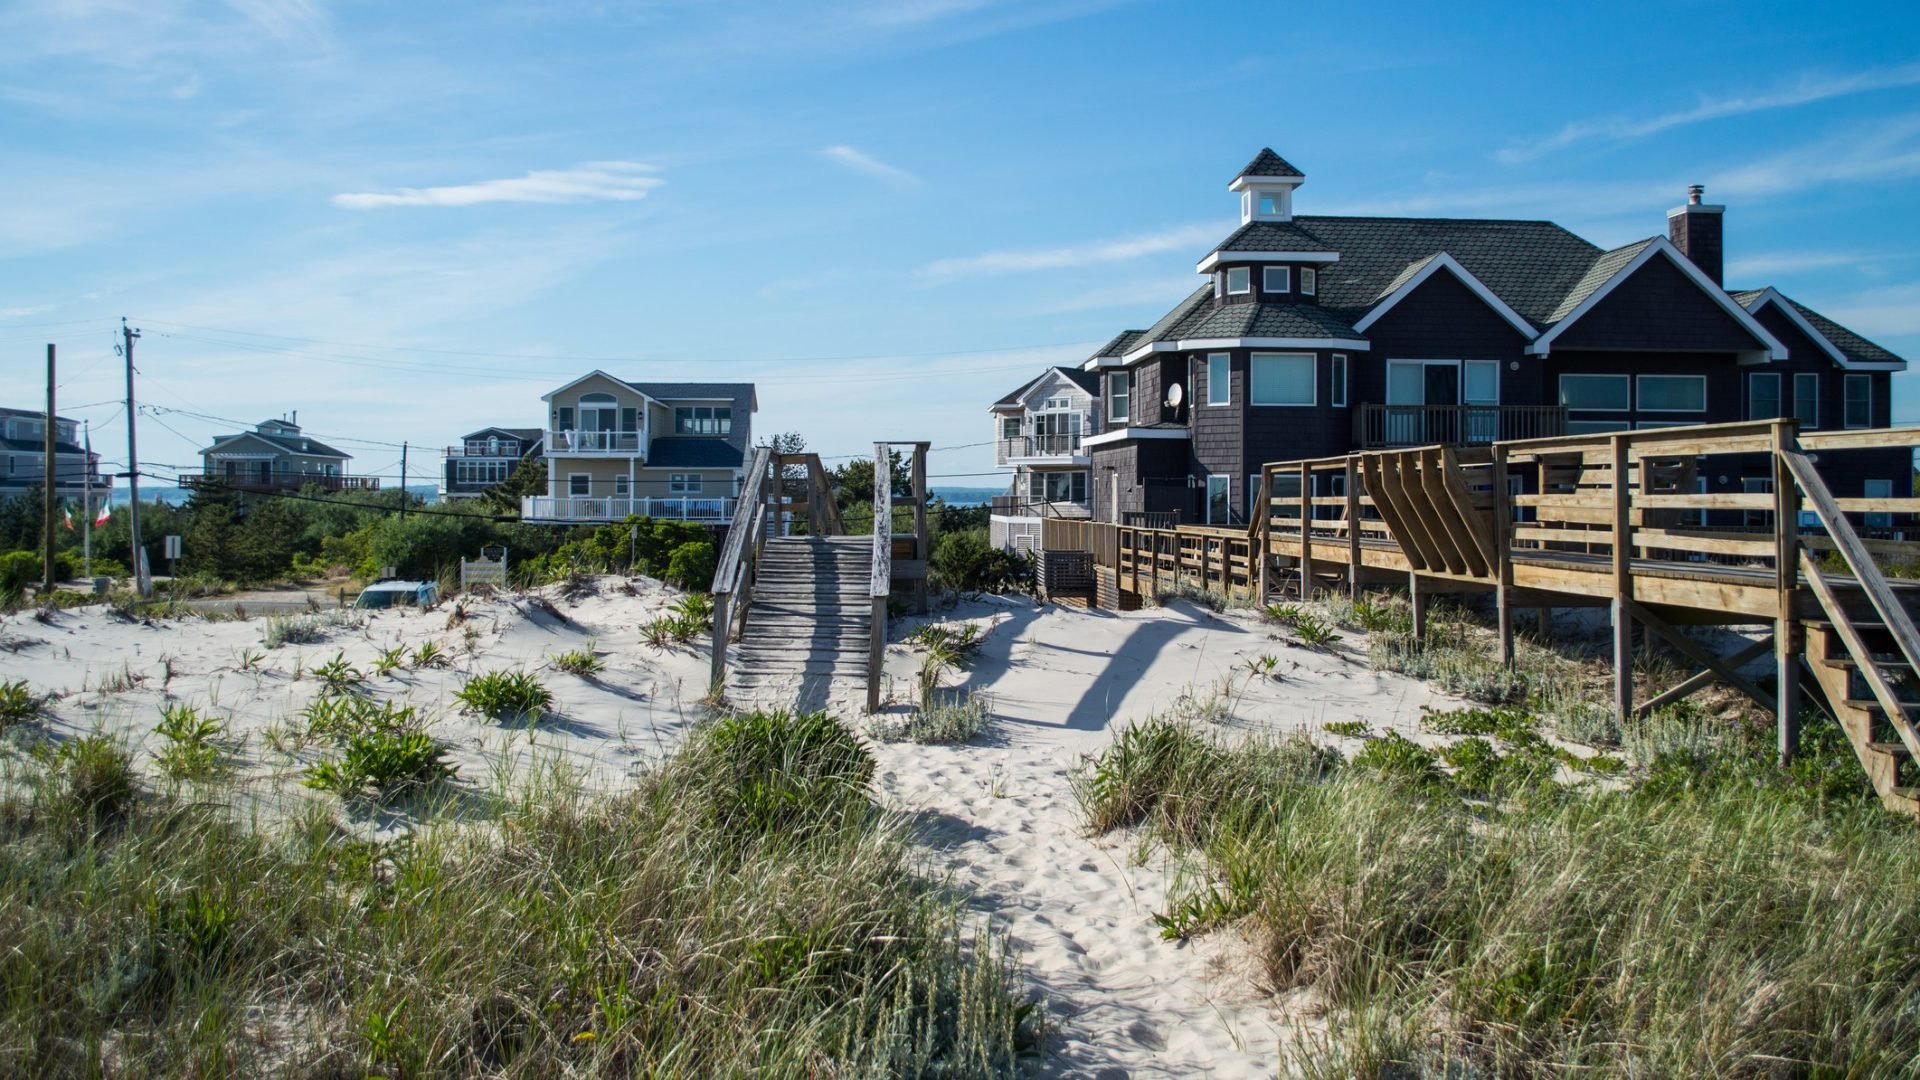 How Much Does It Cost To Retire in the Hamptons?